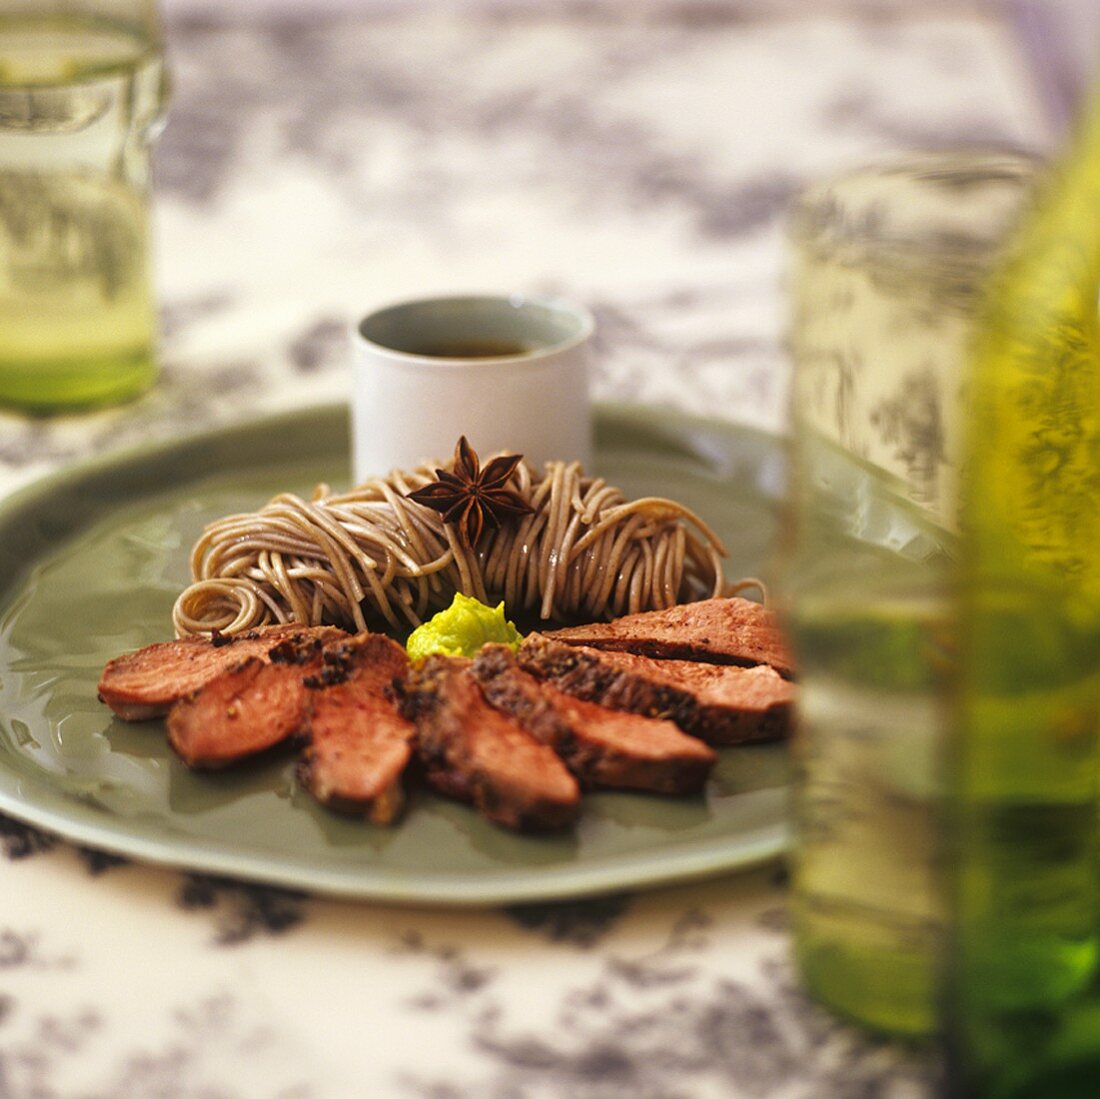 Steamed duck breast with soba noodles & spicy wasabi sauce